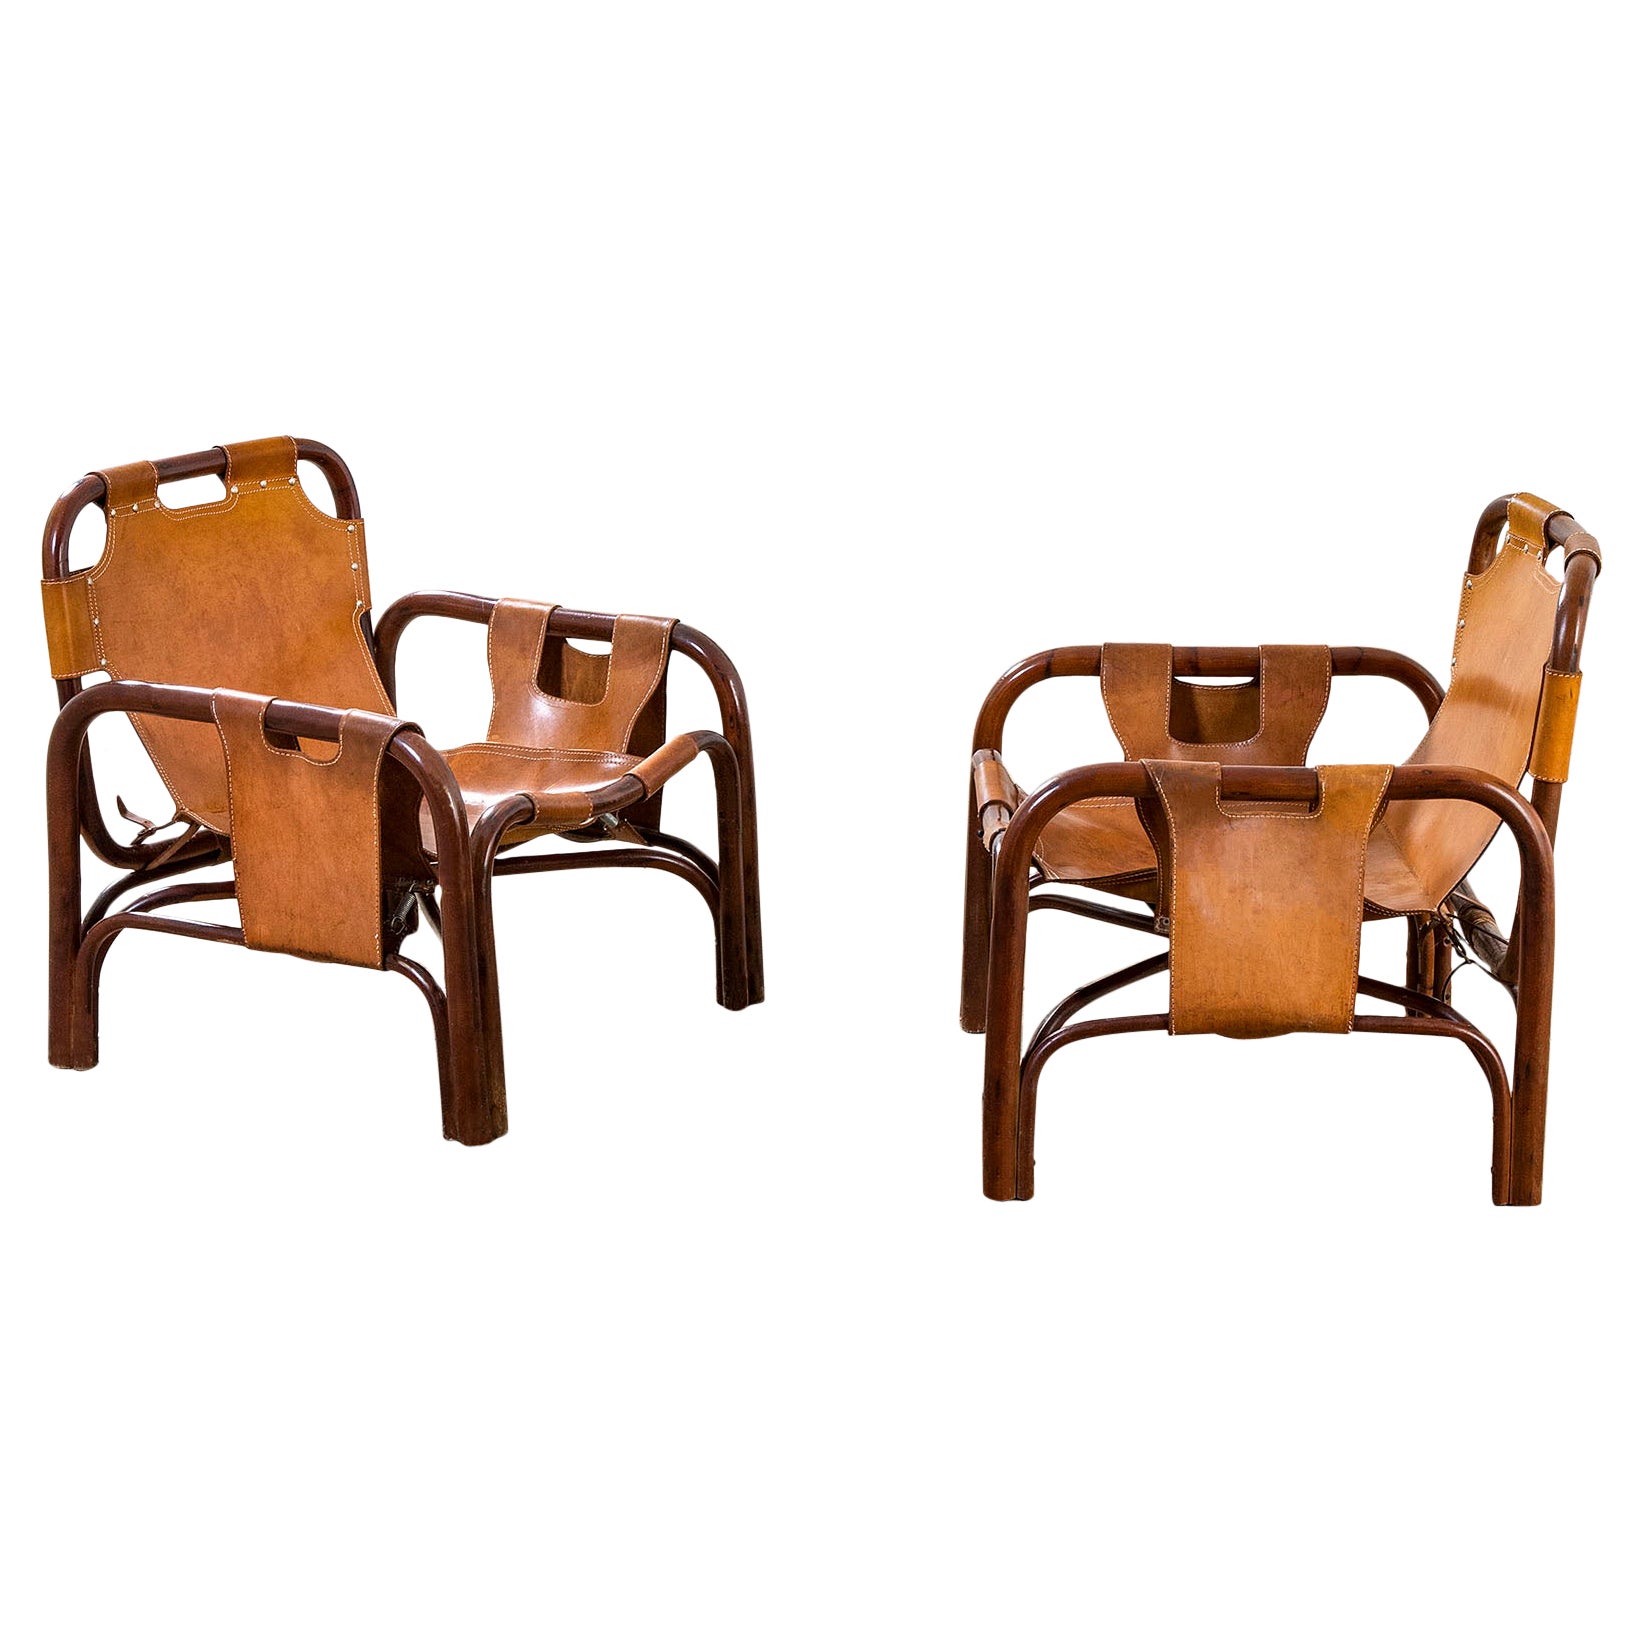 20th Century Tito Agnoli Pair of Armchairs "Safari" Bamboo and Faux Leather, 60s For Sale